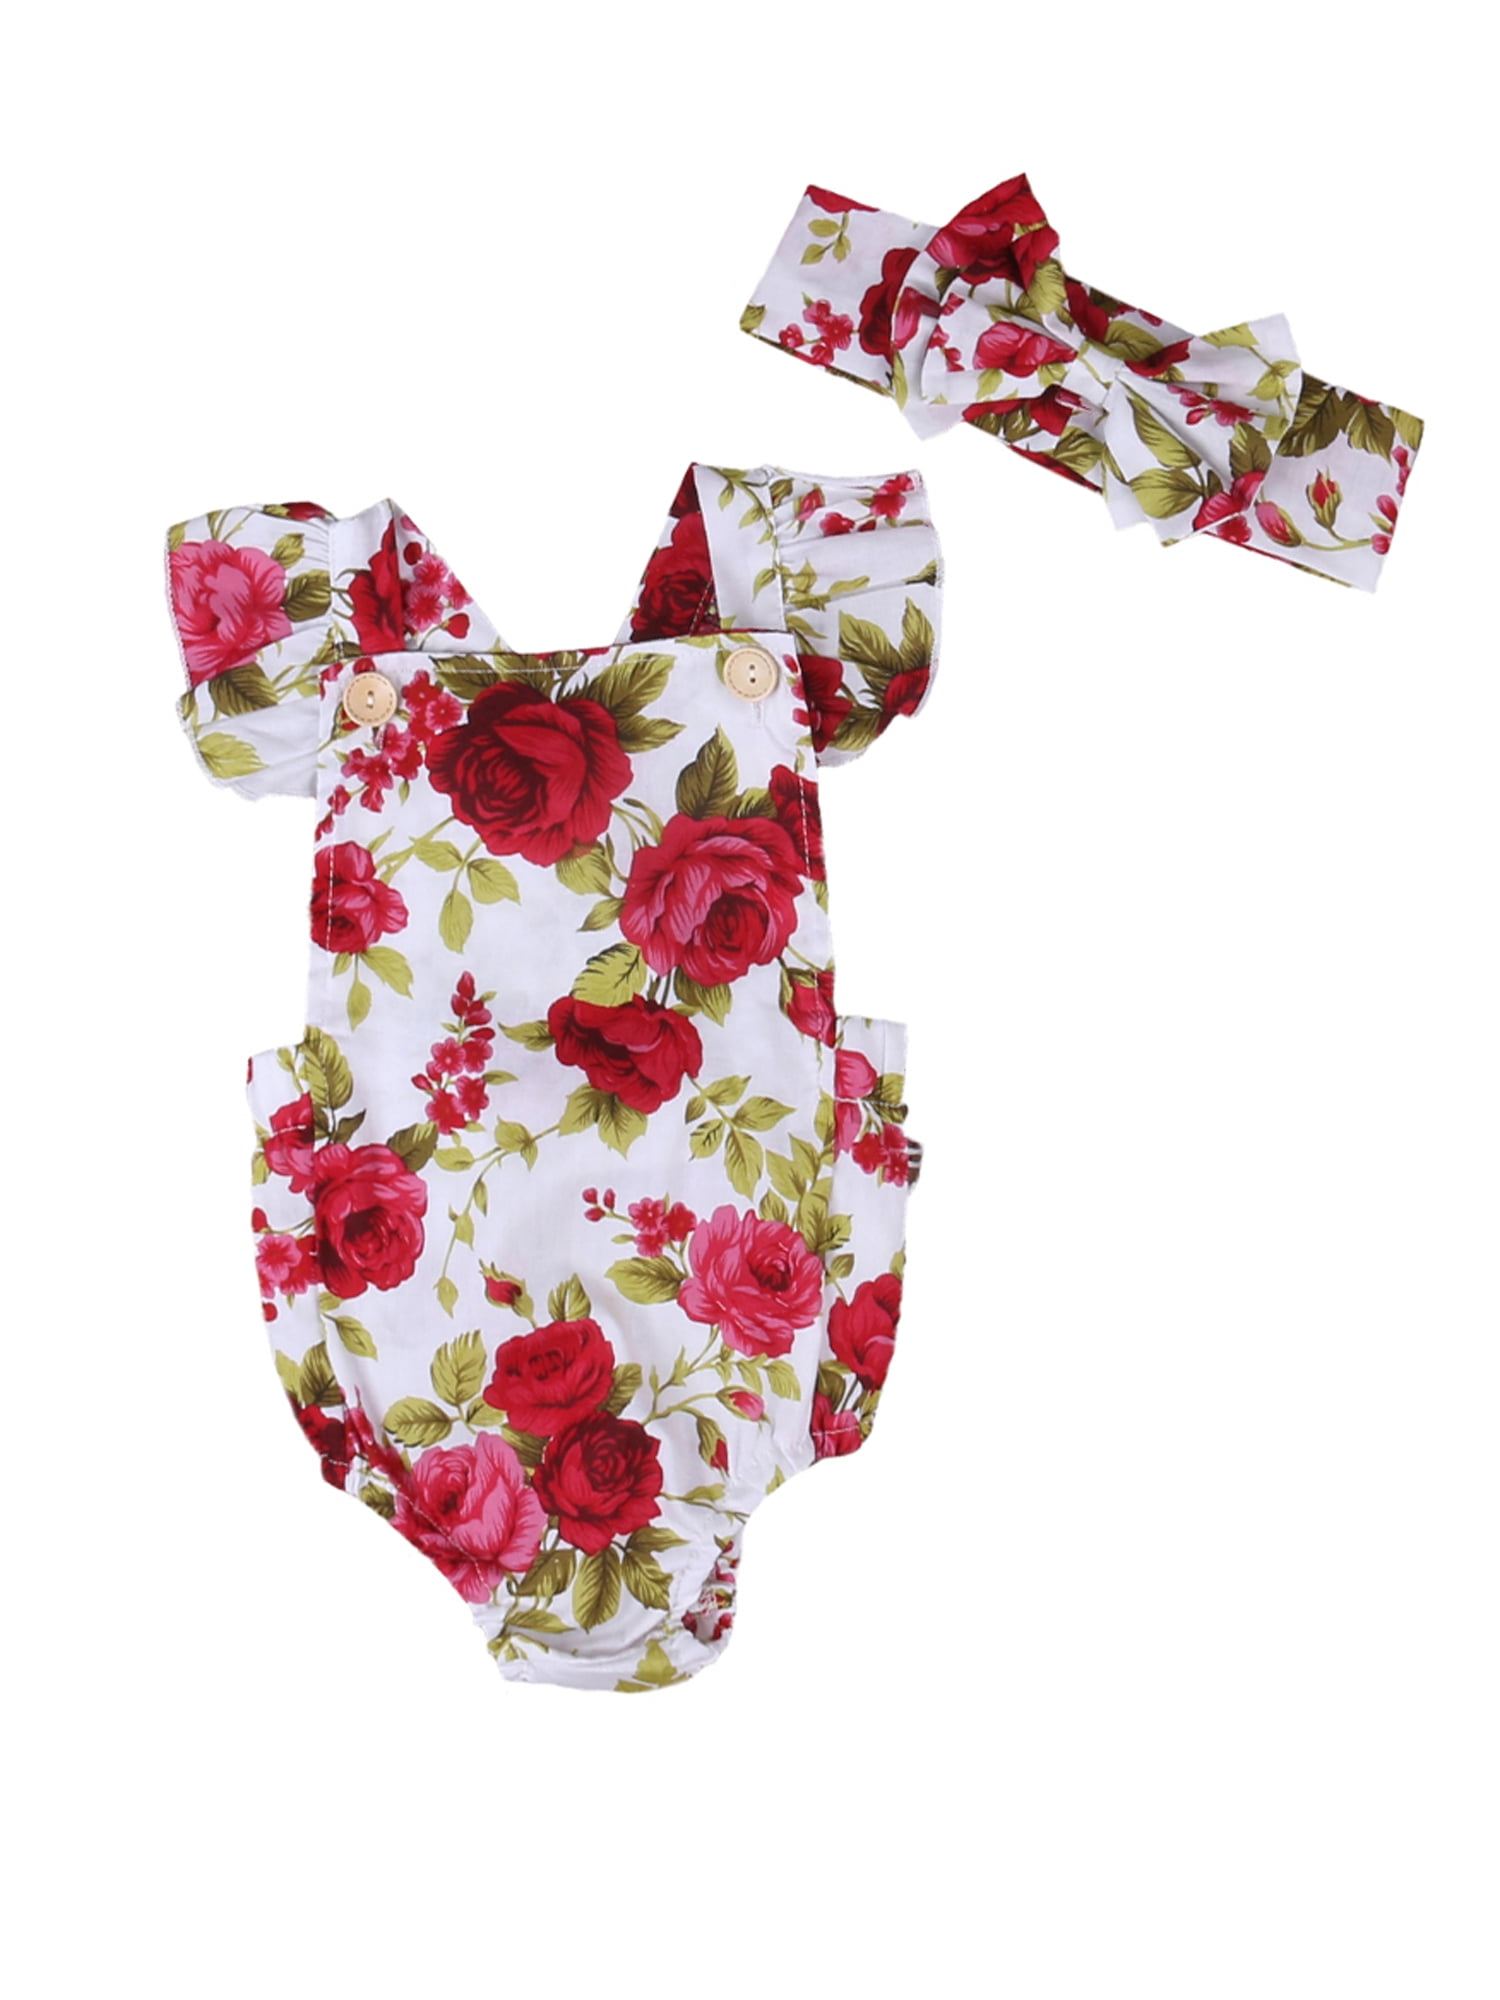 Baby Bodysuit Clothes Girl Headband Jumpsuit Newborn Romper Outfit Infant Floral 